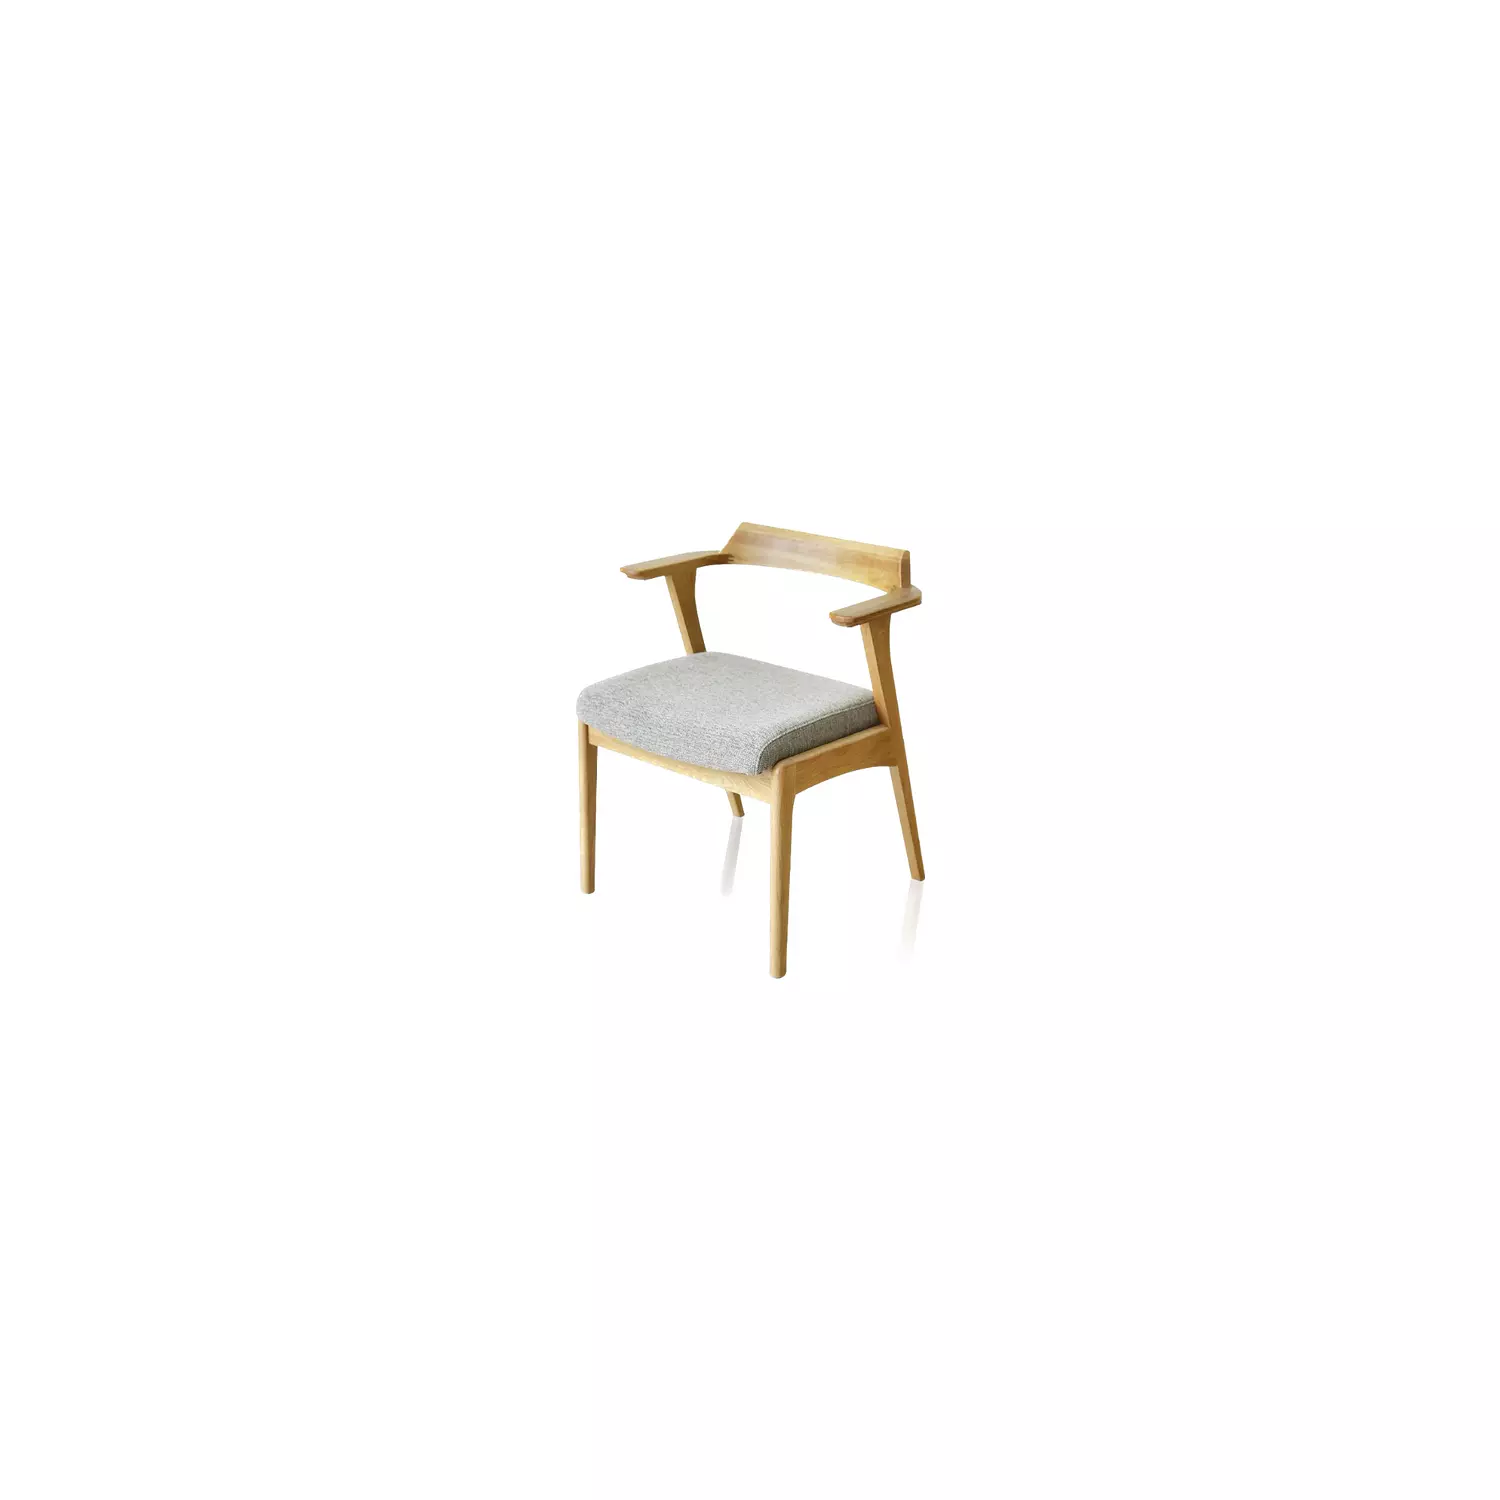 JAPANESE CHAIR hover image